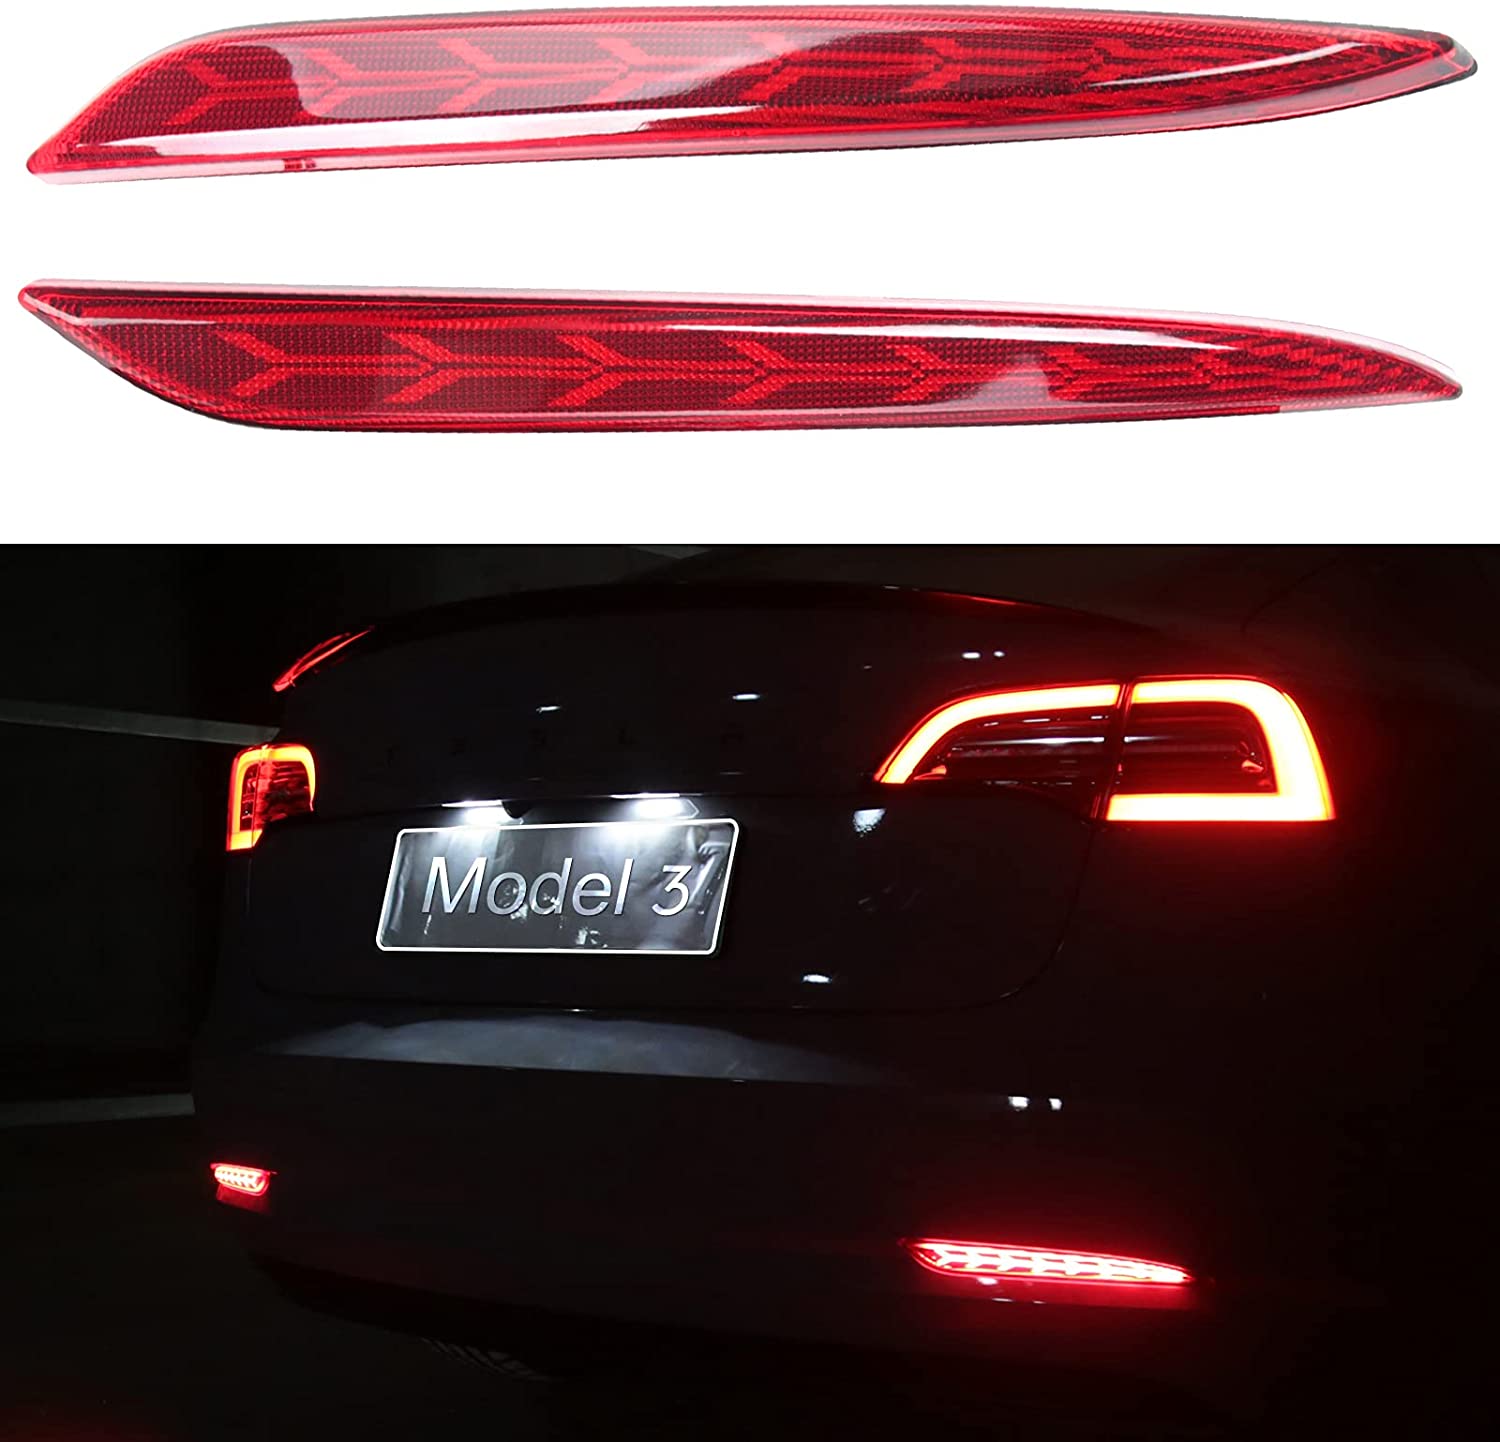 Myq Tesla Model 3tesla Model 3/y Rearview Mirror Base & Cover Kit -  2018-2021 Replacement Parts